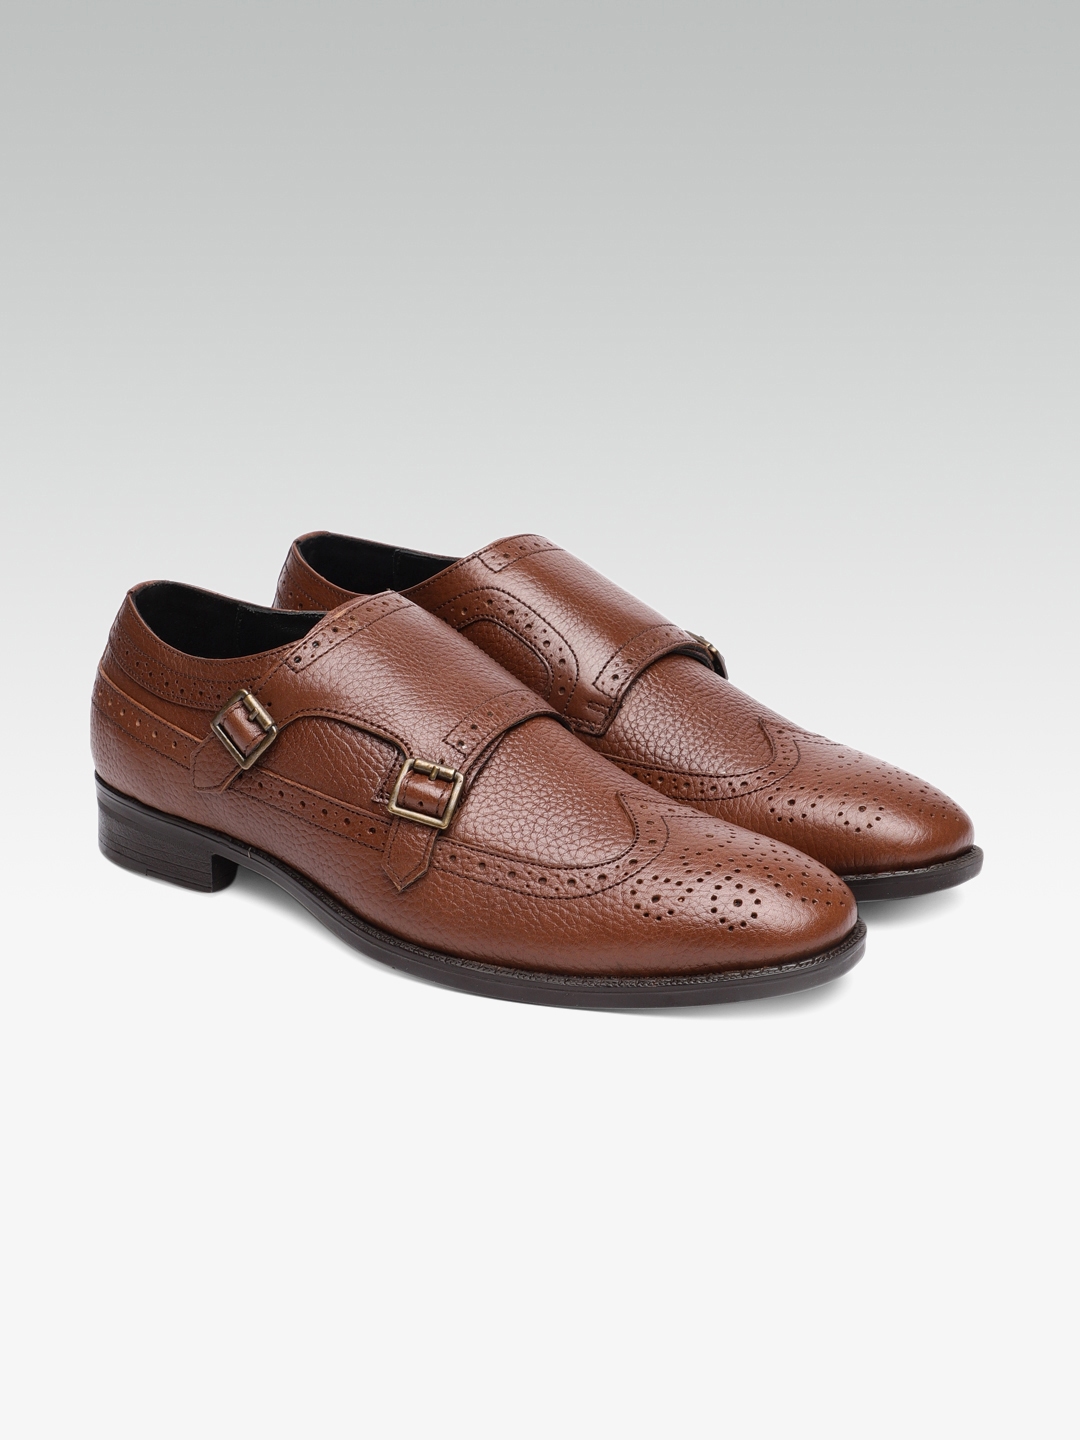 Buy Carlton London Men Brown Textured Leather Brogued Monk Shoes ...